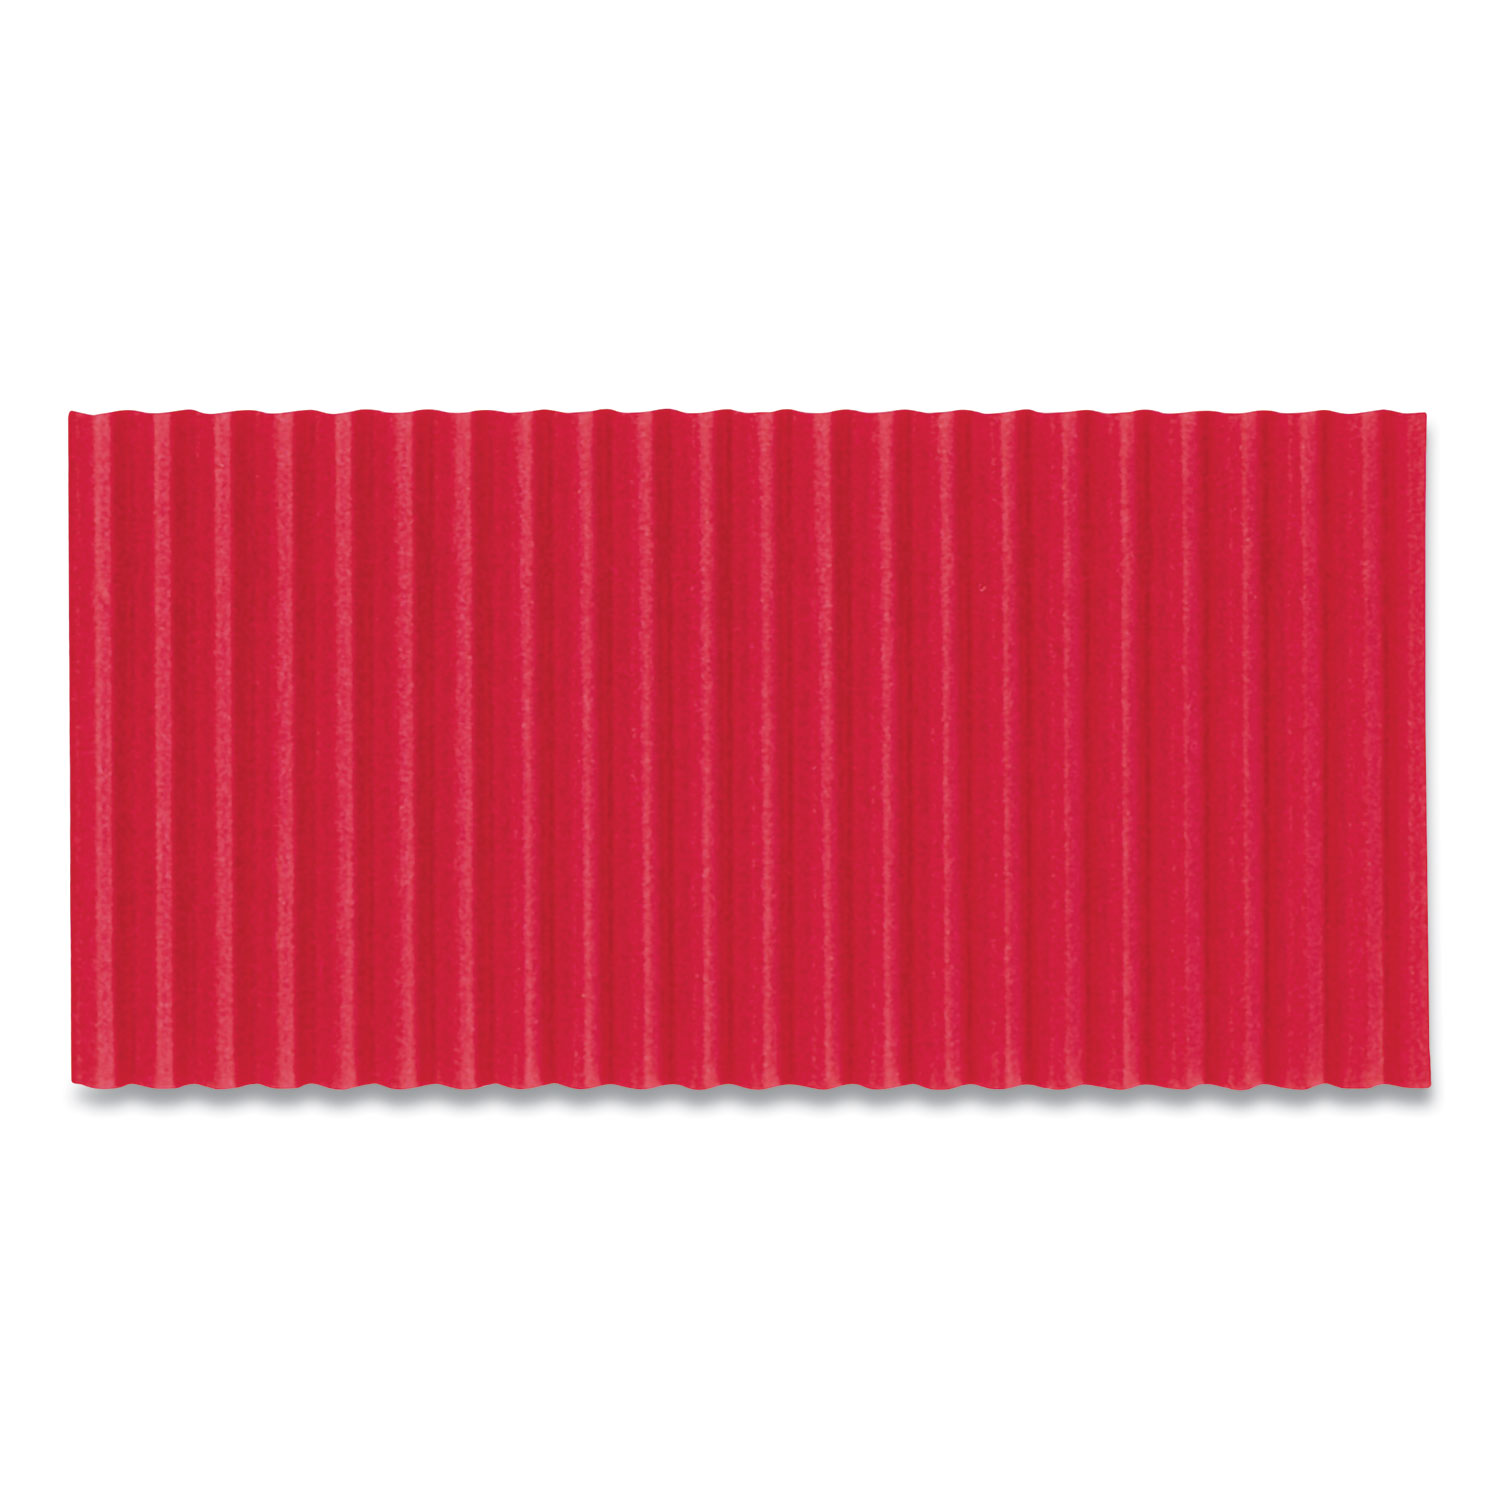 Pacon® Corobuff Corrugated Paper Roll, 48 x 25 ft, Flame Red